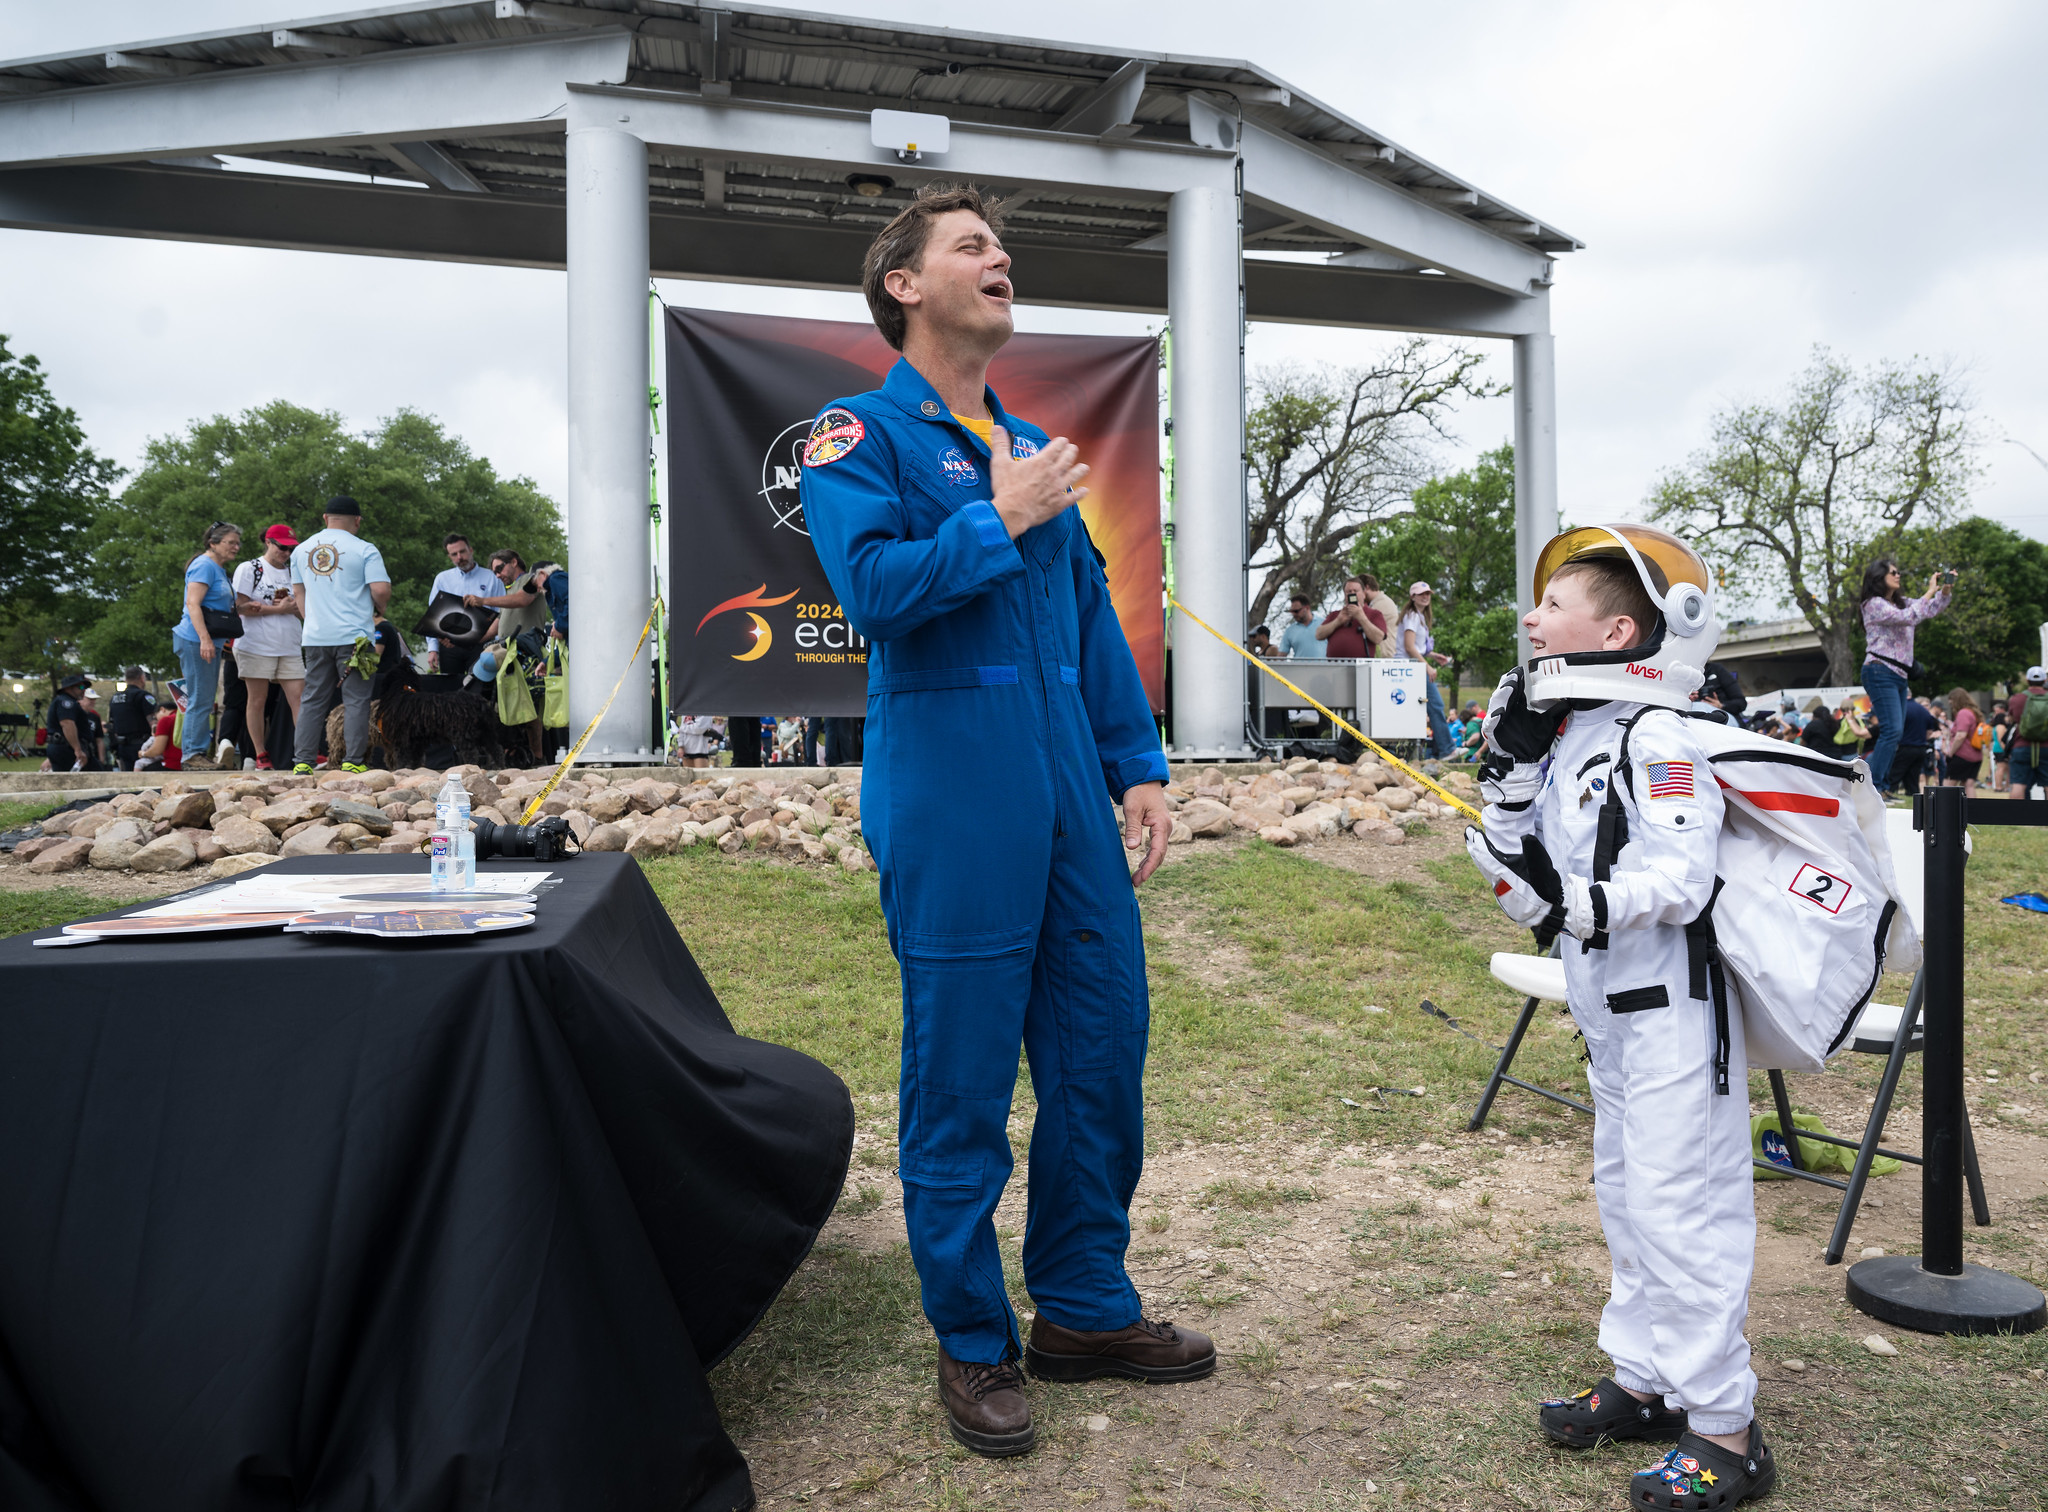 A man in a blue astronaut jumpsuit stands on grass next to a young child wearing an astronaut costume. They are outdoors, near a table with eclipse-themed photo props. Behind them, people stand under a white pavilion. There is a large banner on the pavilion that says 